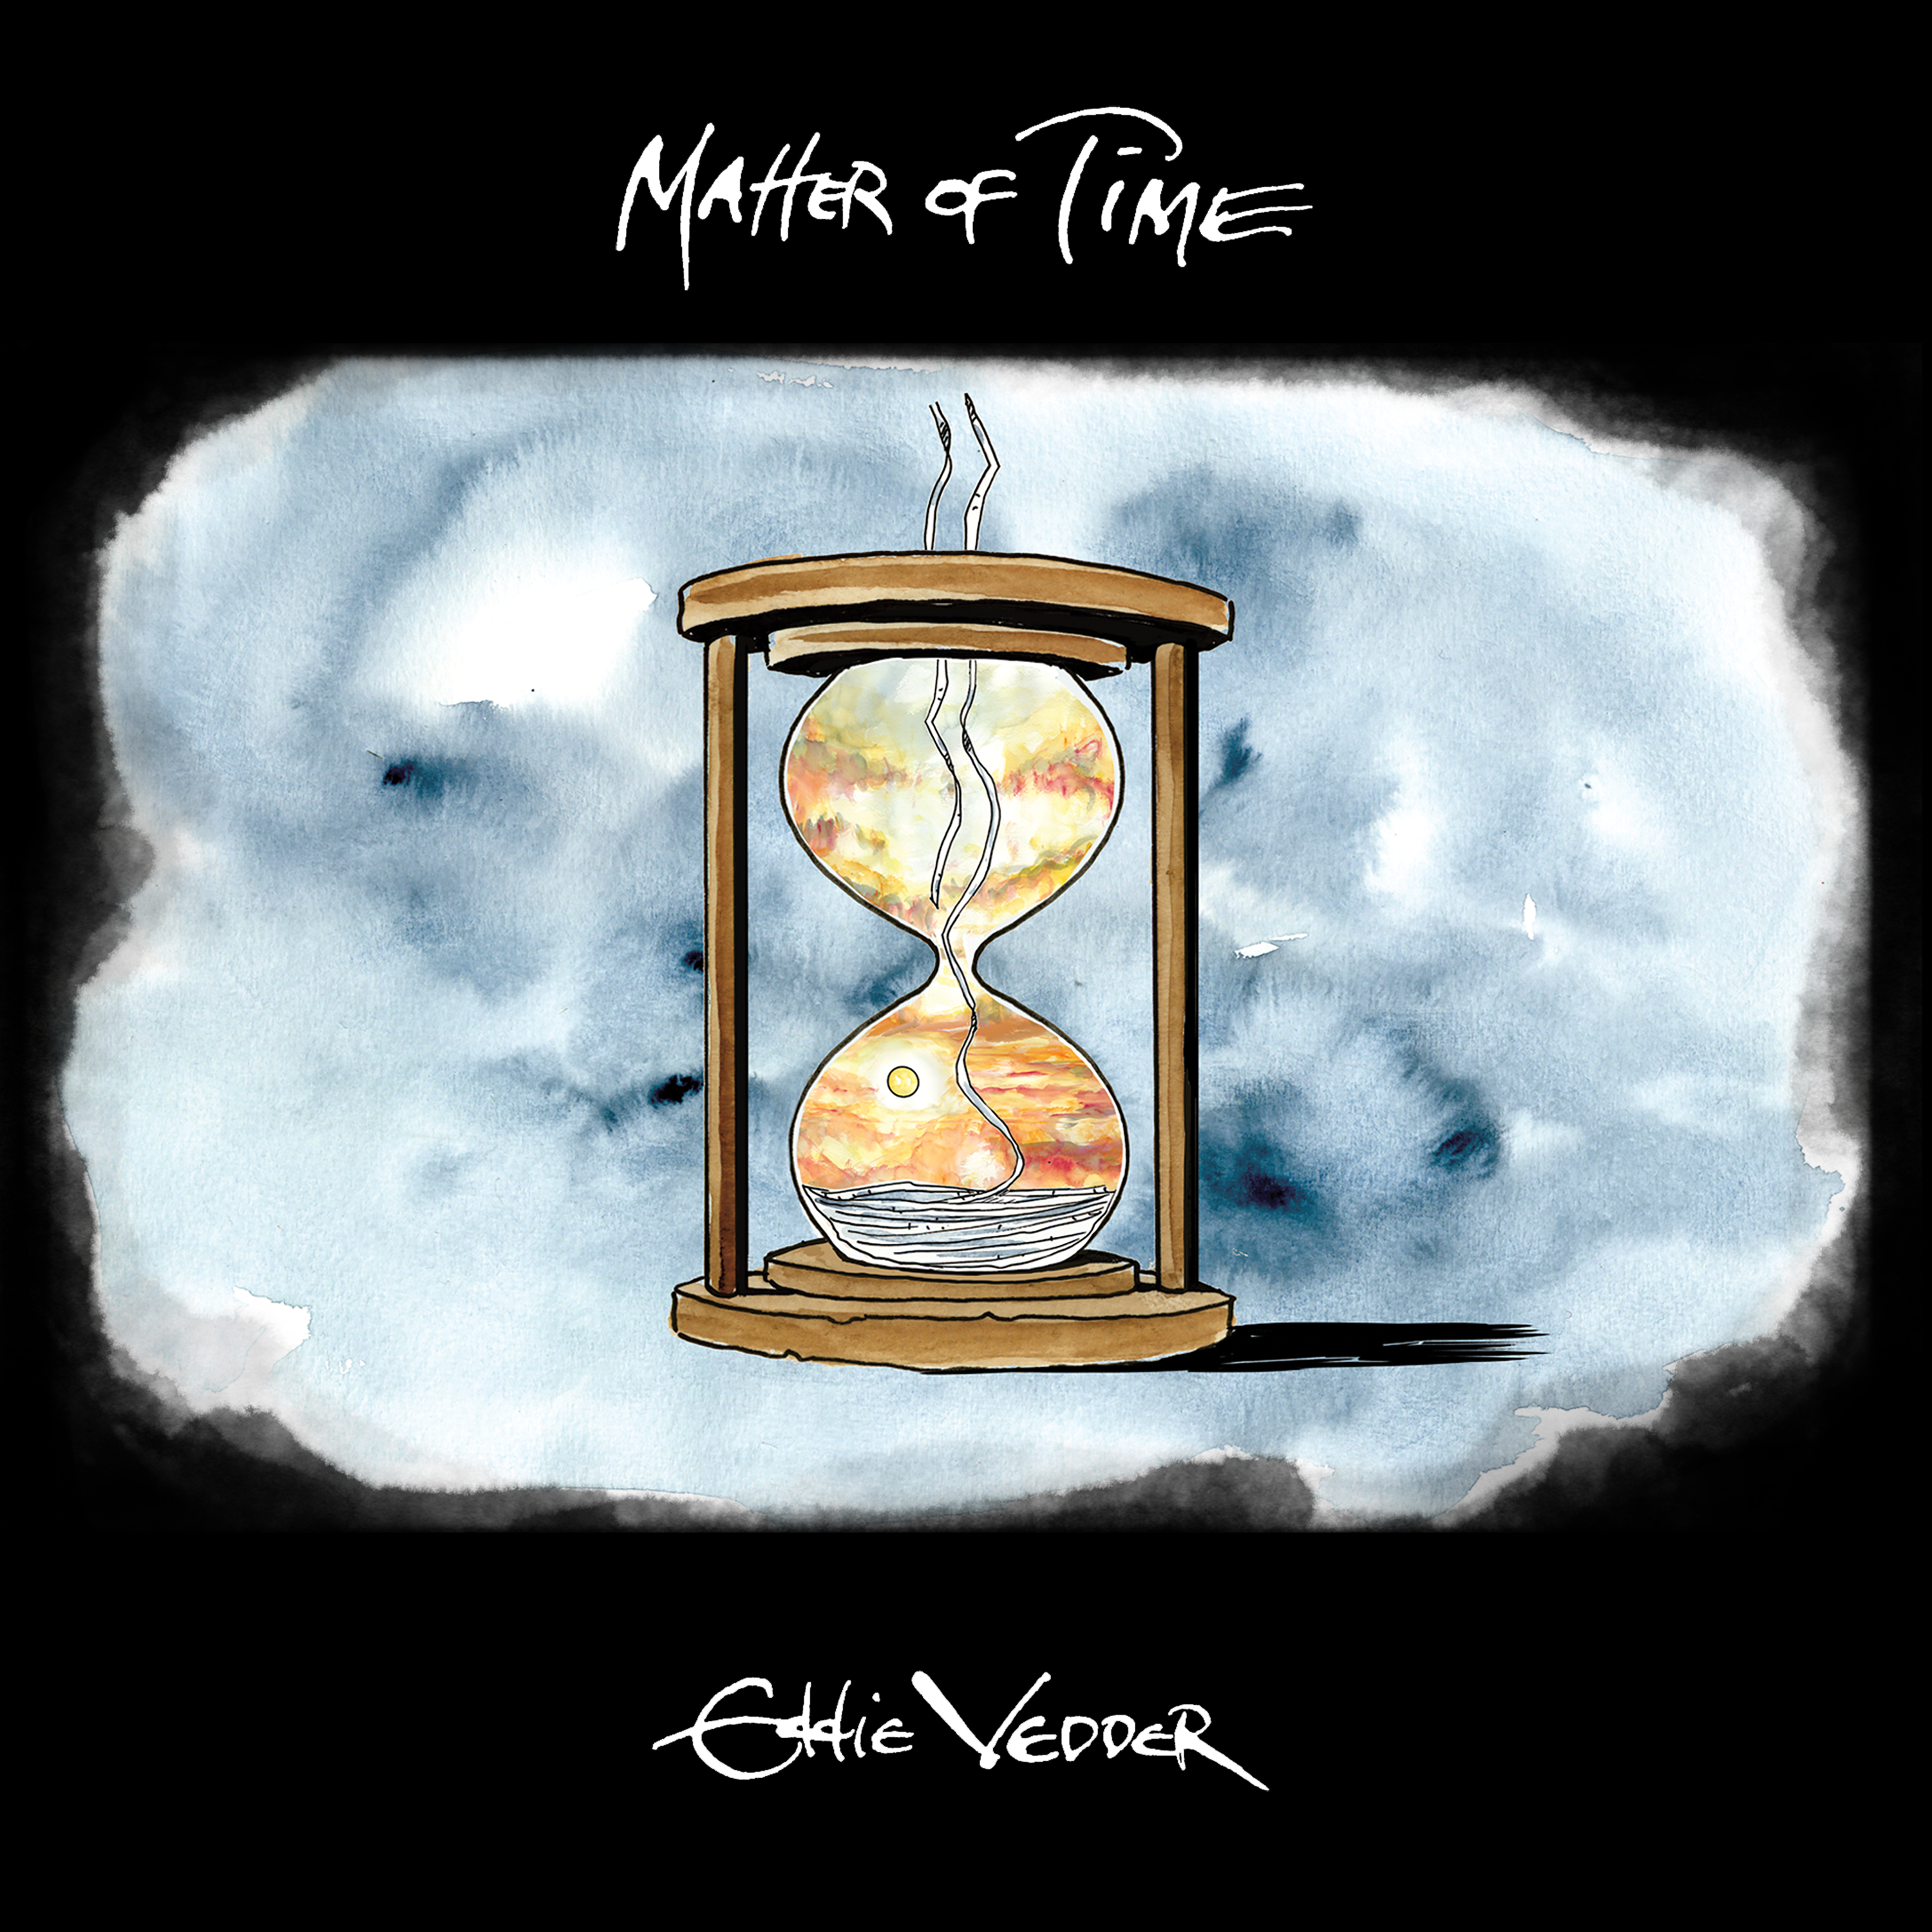 EDDIE VEDDER UNVEILS NEW TRACKS “MATTER OF TIME” & “SAY HI” FOLLOWING VENTURE INTO CURES